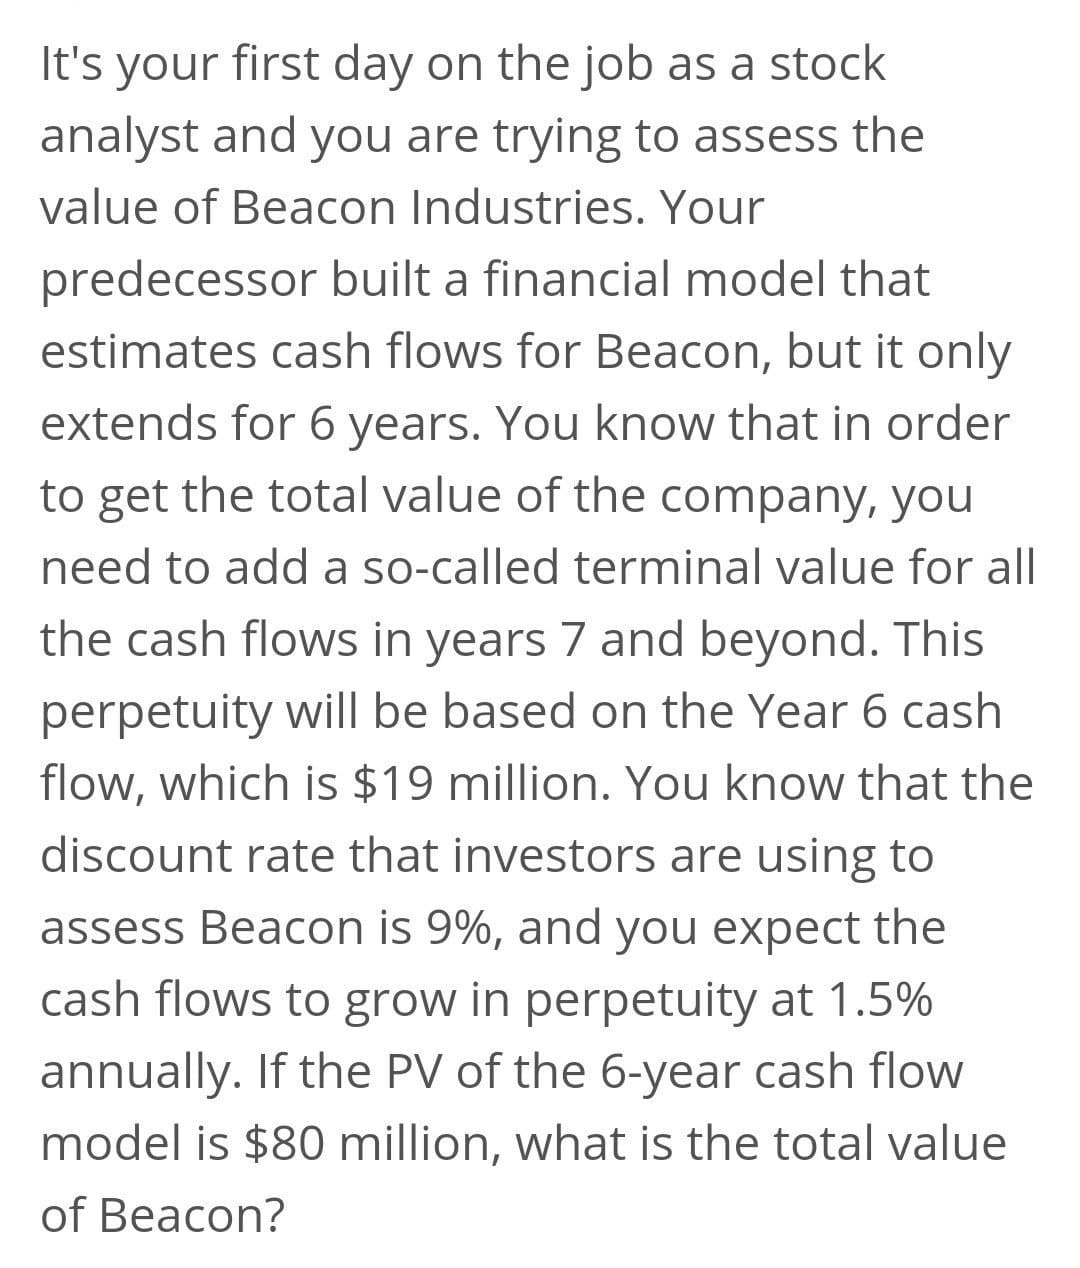 It's your first day on the job as a stock
analyst and you are trying to assess the
value of Beacon Industries. Your
predecessor built a financial model that
estimates cash flows for Beacon, but it only
extends for 6 years. You know that in order
to get the total value of the company, you
need to add a so-called terminal value for all
the cash flows in years 7 and beyond. This
perpetuity will be based on the Year 6 cash
flow, which is $19 million. You know that the
discount rate that investors are using to
assess Beacon is 9%, and you expect the
cash flows to grow in perpetuity at 1.5%
annually. If the PV of the 6-year cash flow
model is $80 million, what is the total value
of Beacon?
